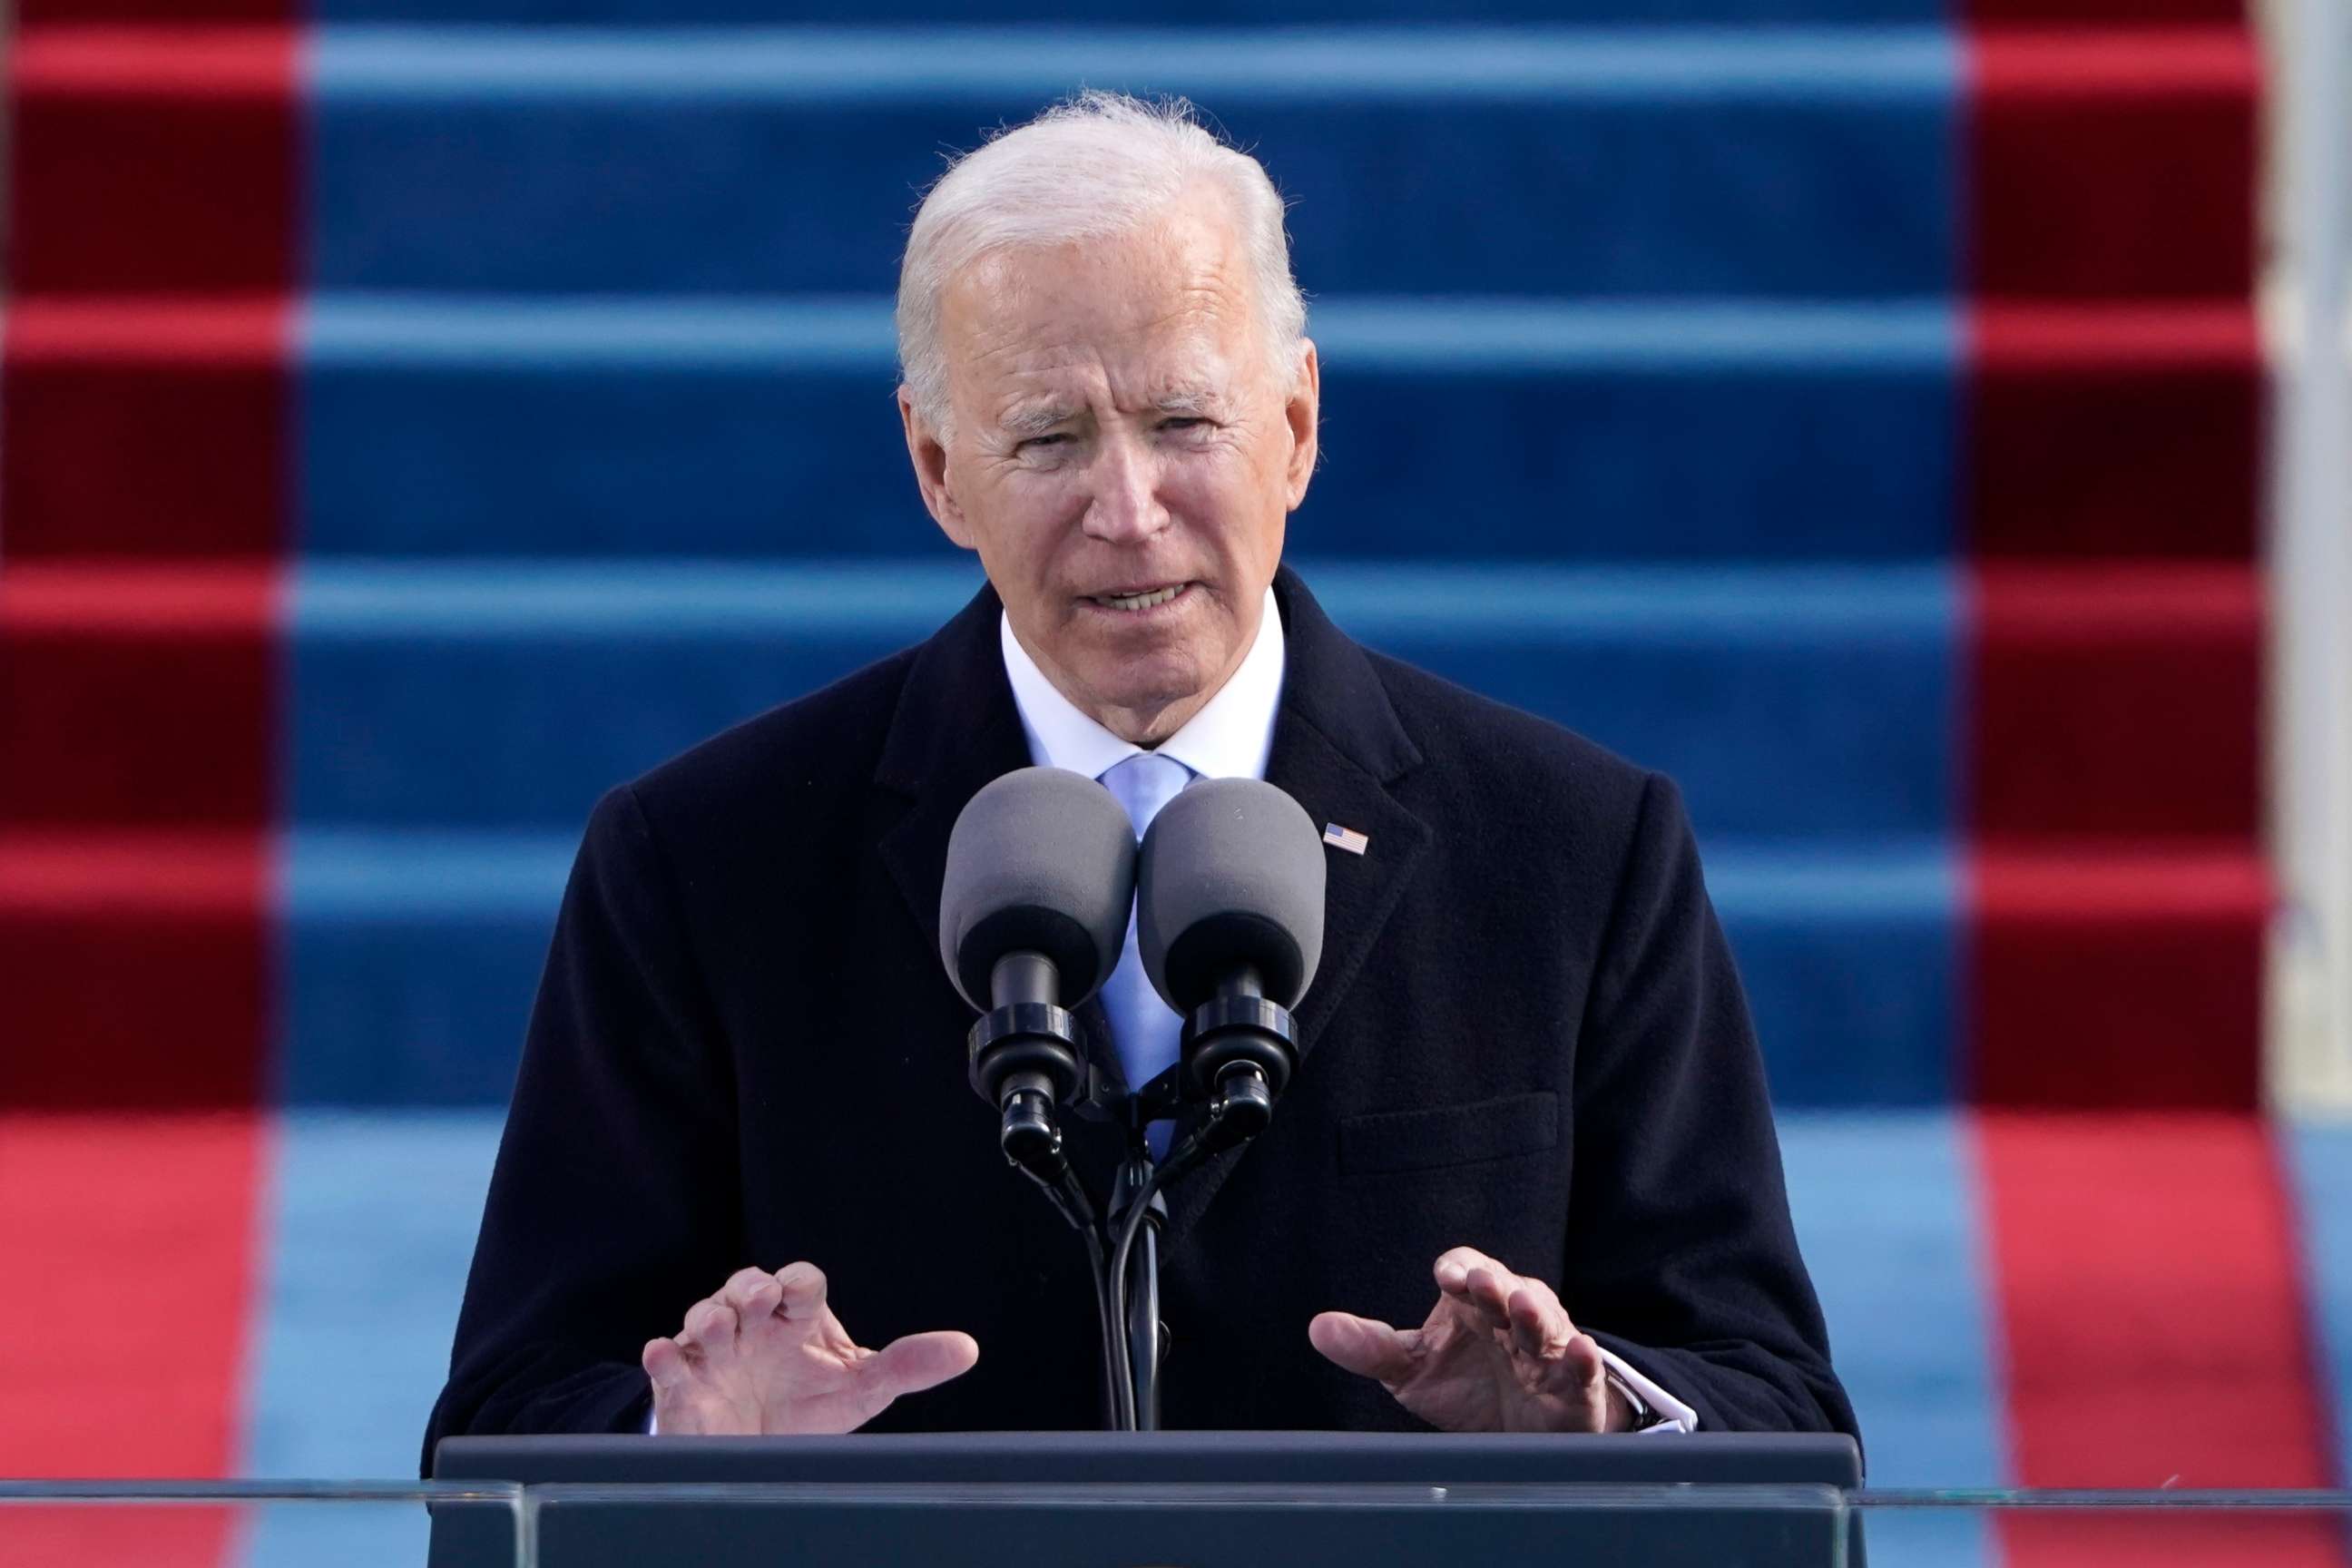 PHOTO: President Joe Biden speaks during the 59th Presidential Inauguration after being sworn in at the U.S. Capitol in Washington, Jan. 20, 2021.